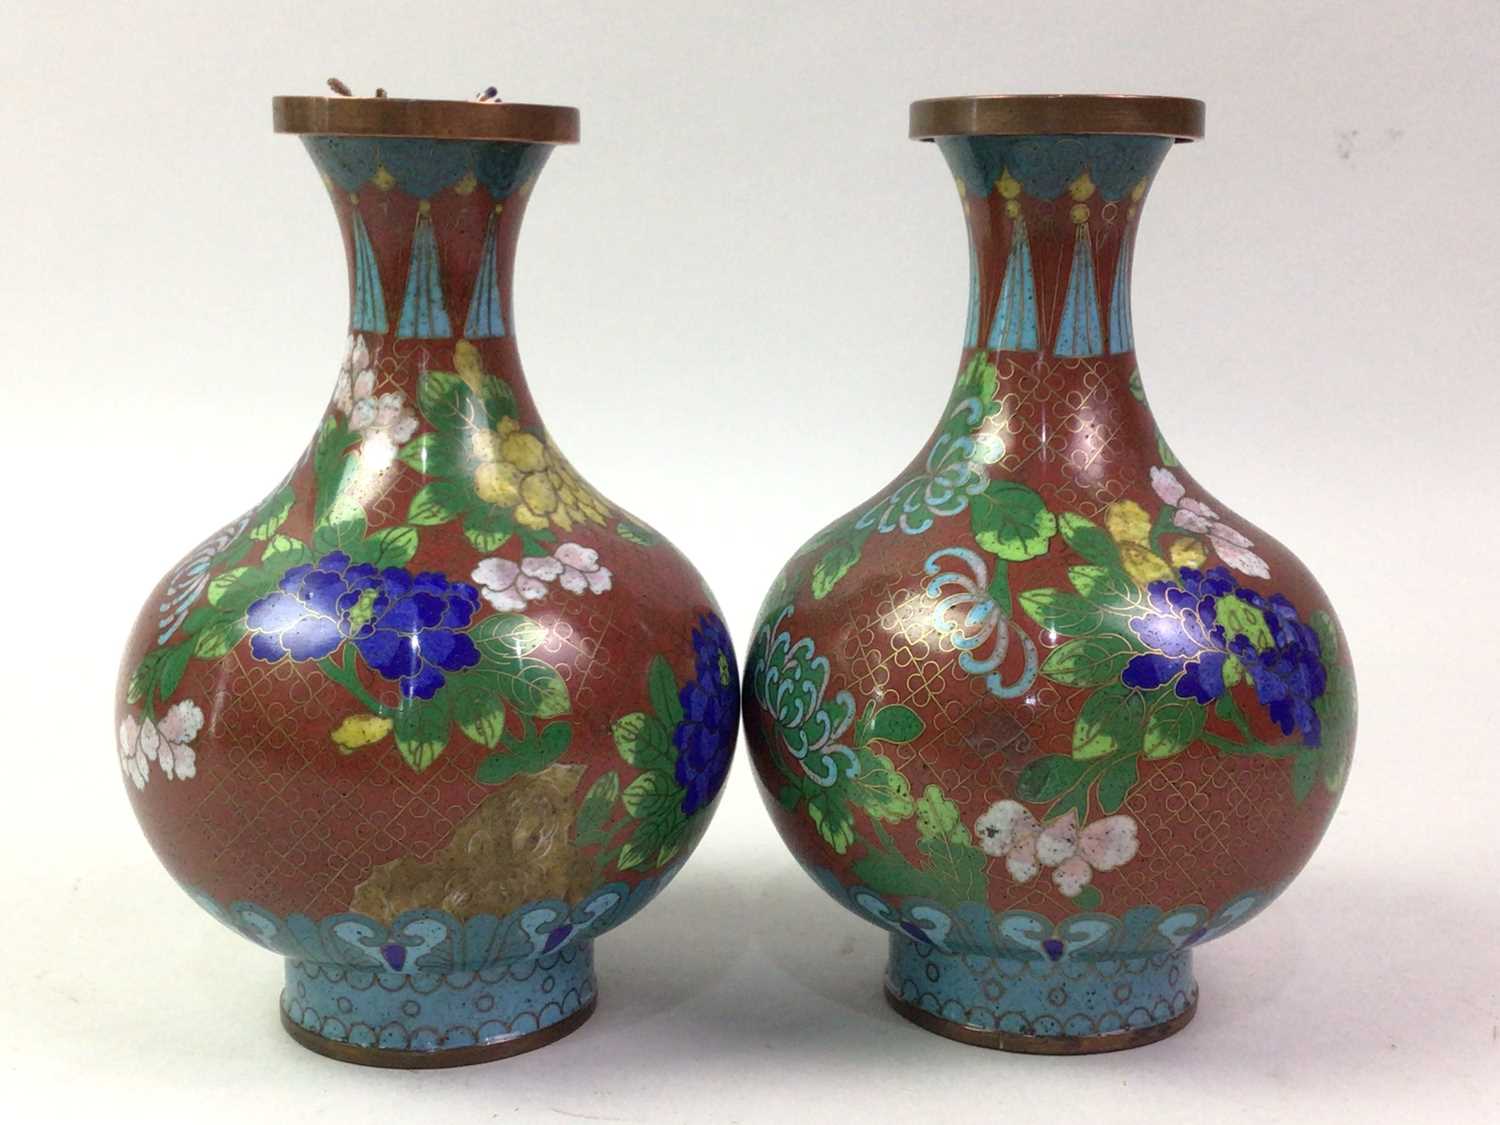 Lot 720 - PAIR OF CHINESE CLOISONNE VASES